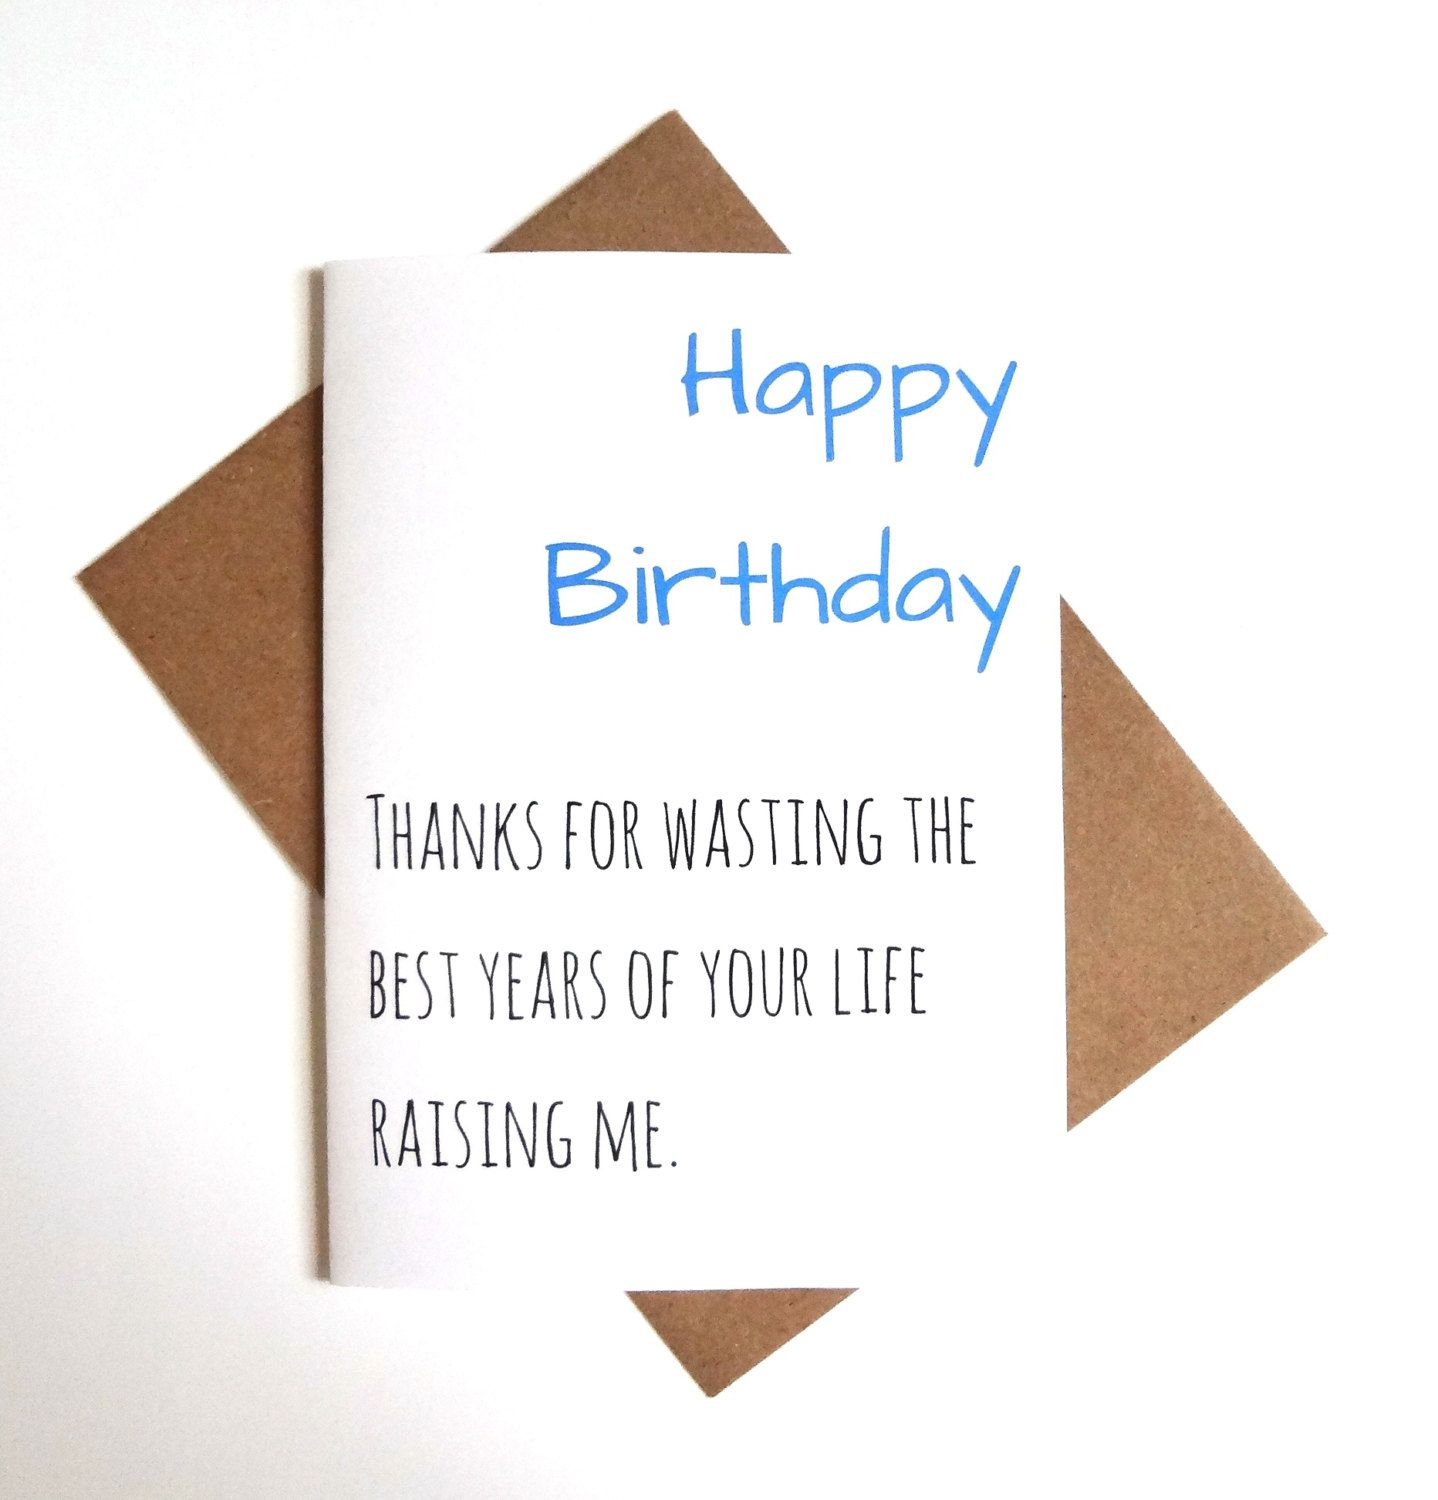 Happy Birthday Card Ideas For Mom Funny Birthday Cards For Mom Inside Card Design Ideas What Put